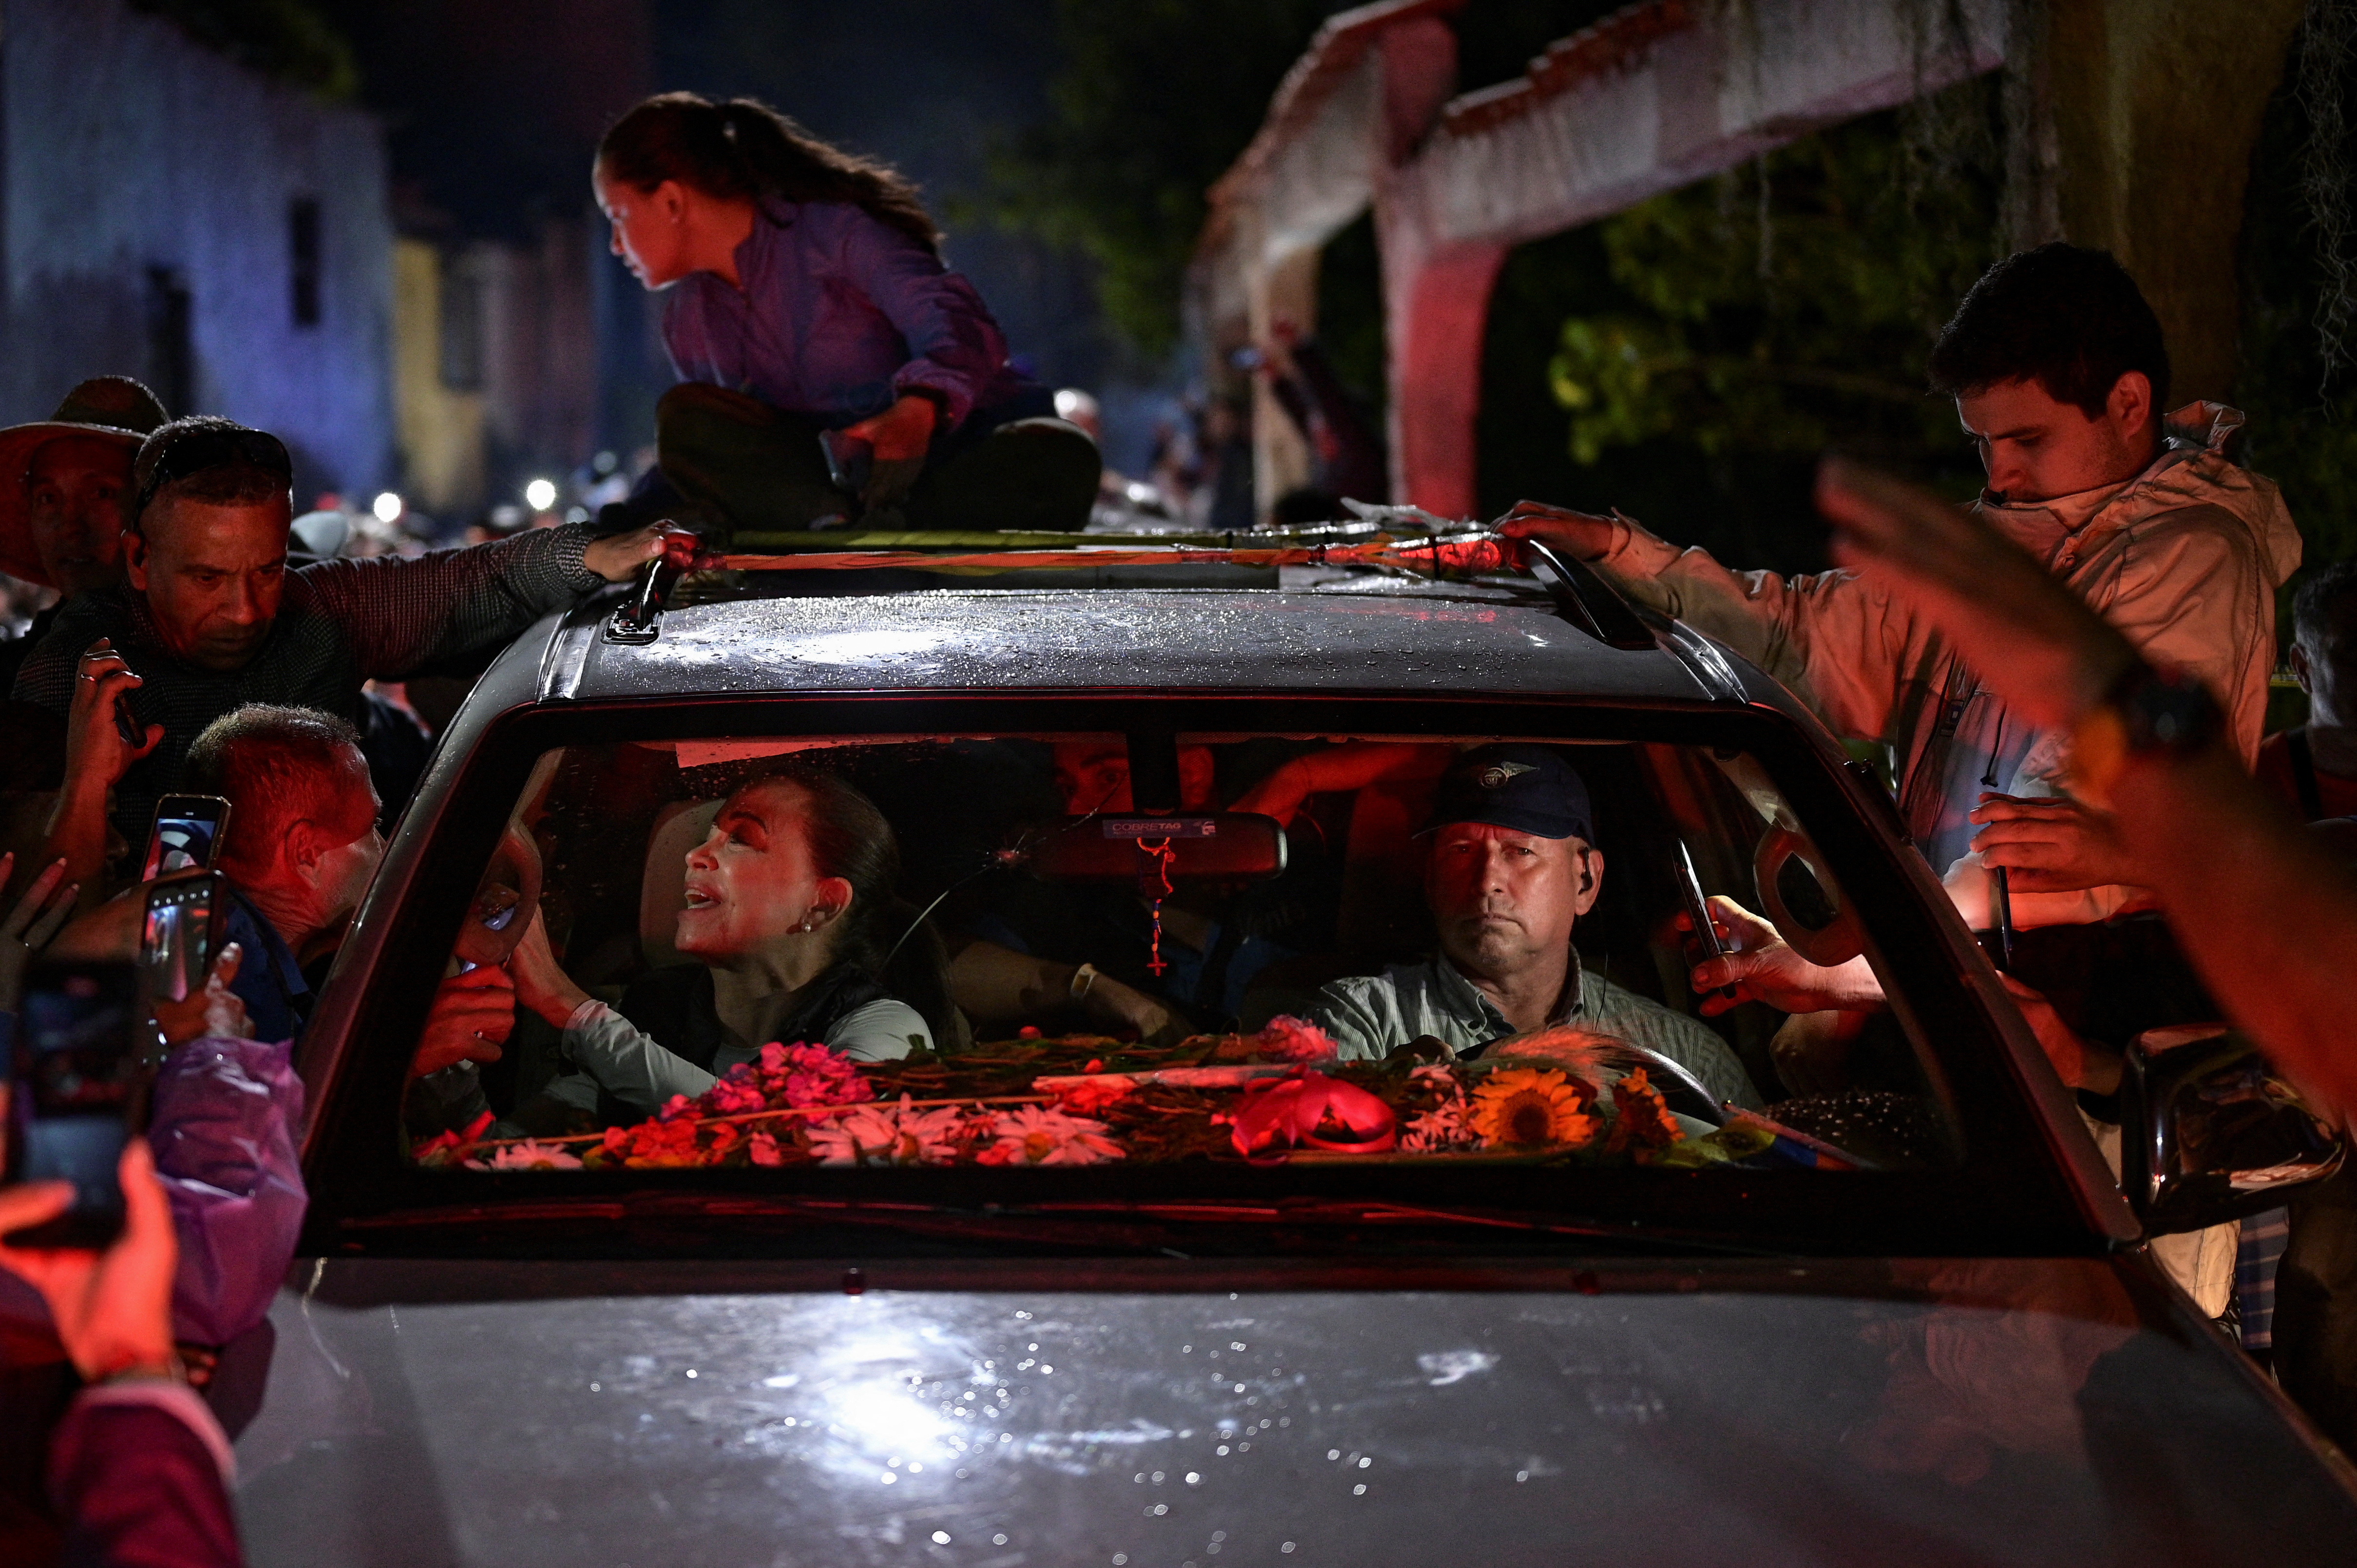 Milciades Avila, security chief of opposition leader Maria Corina Machado, drives her car during a rally, in Merida state